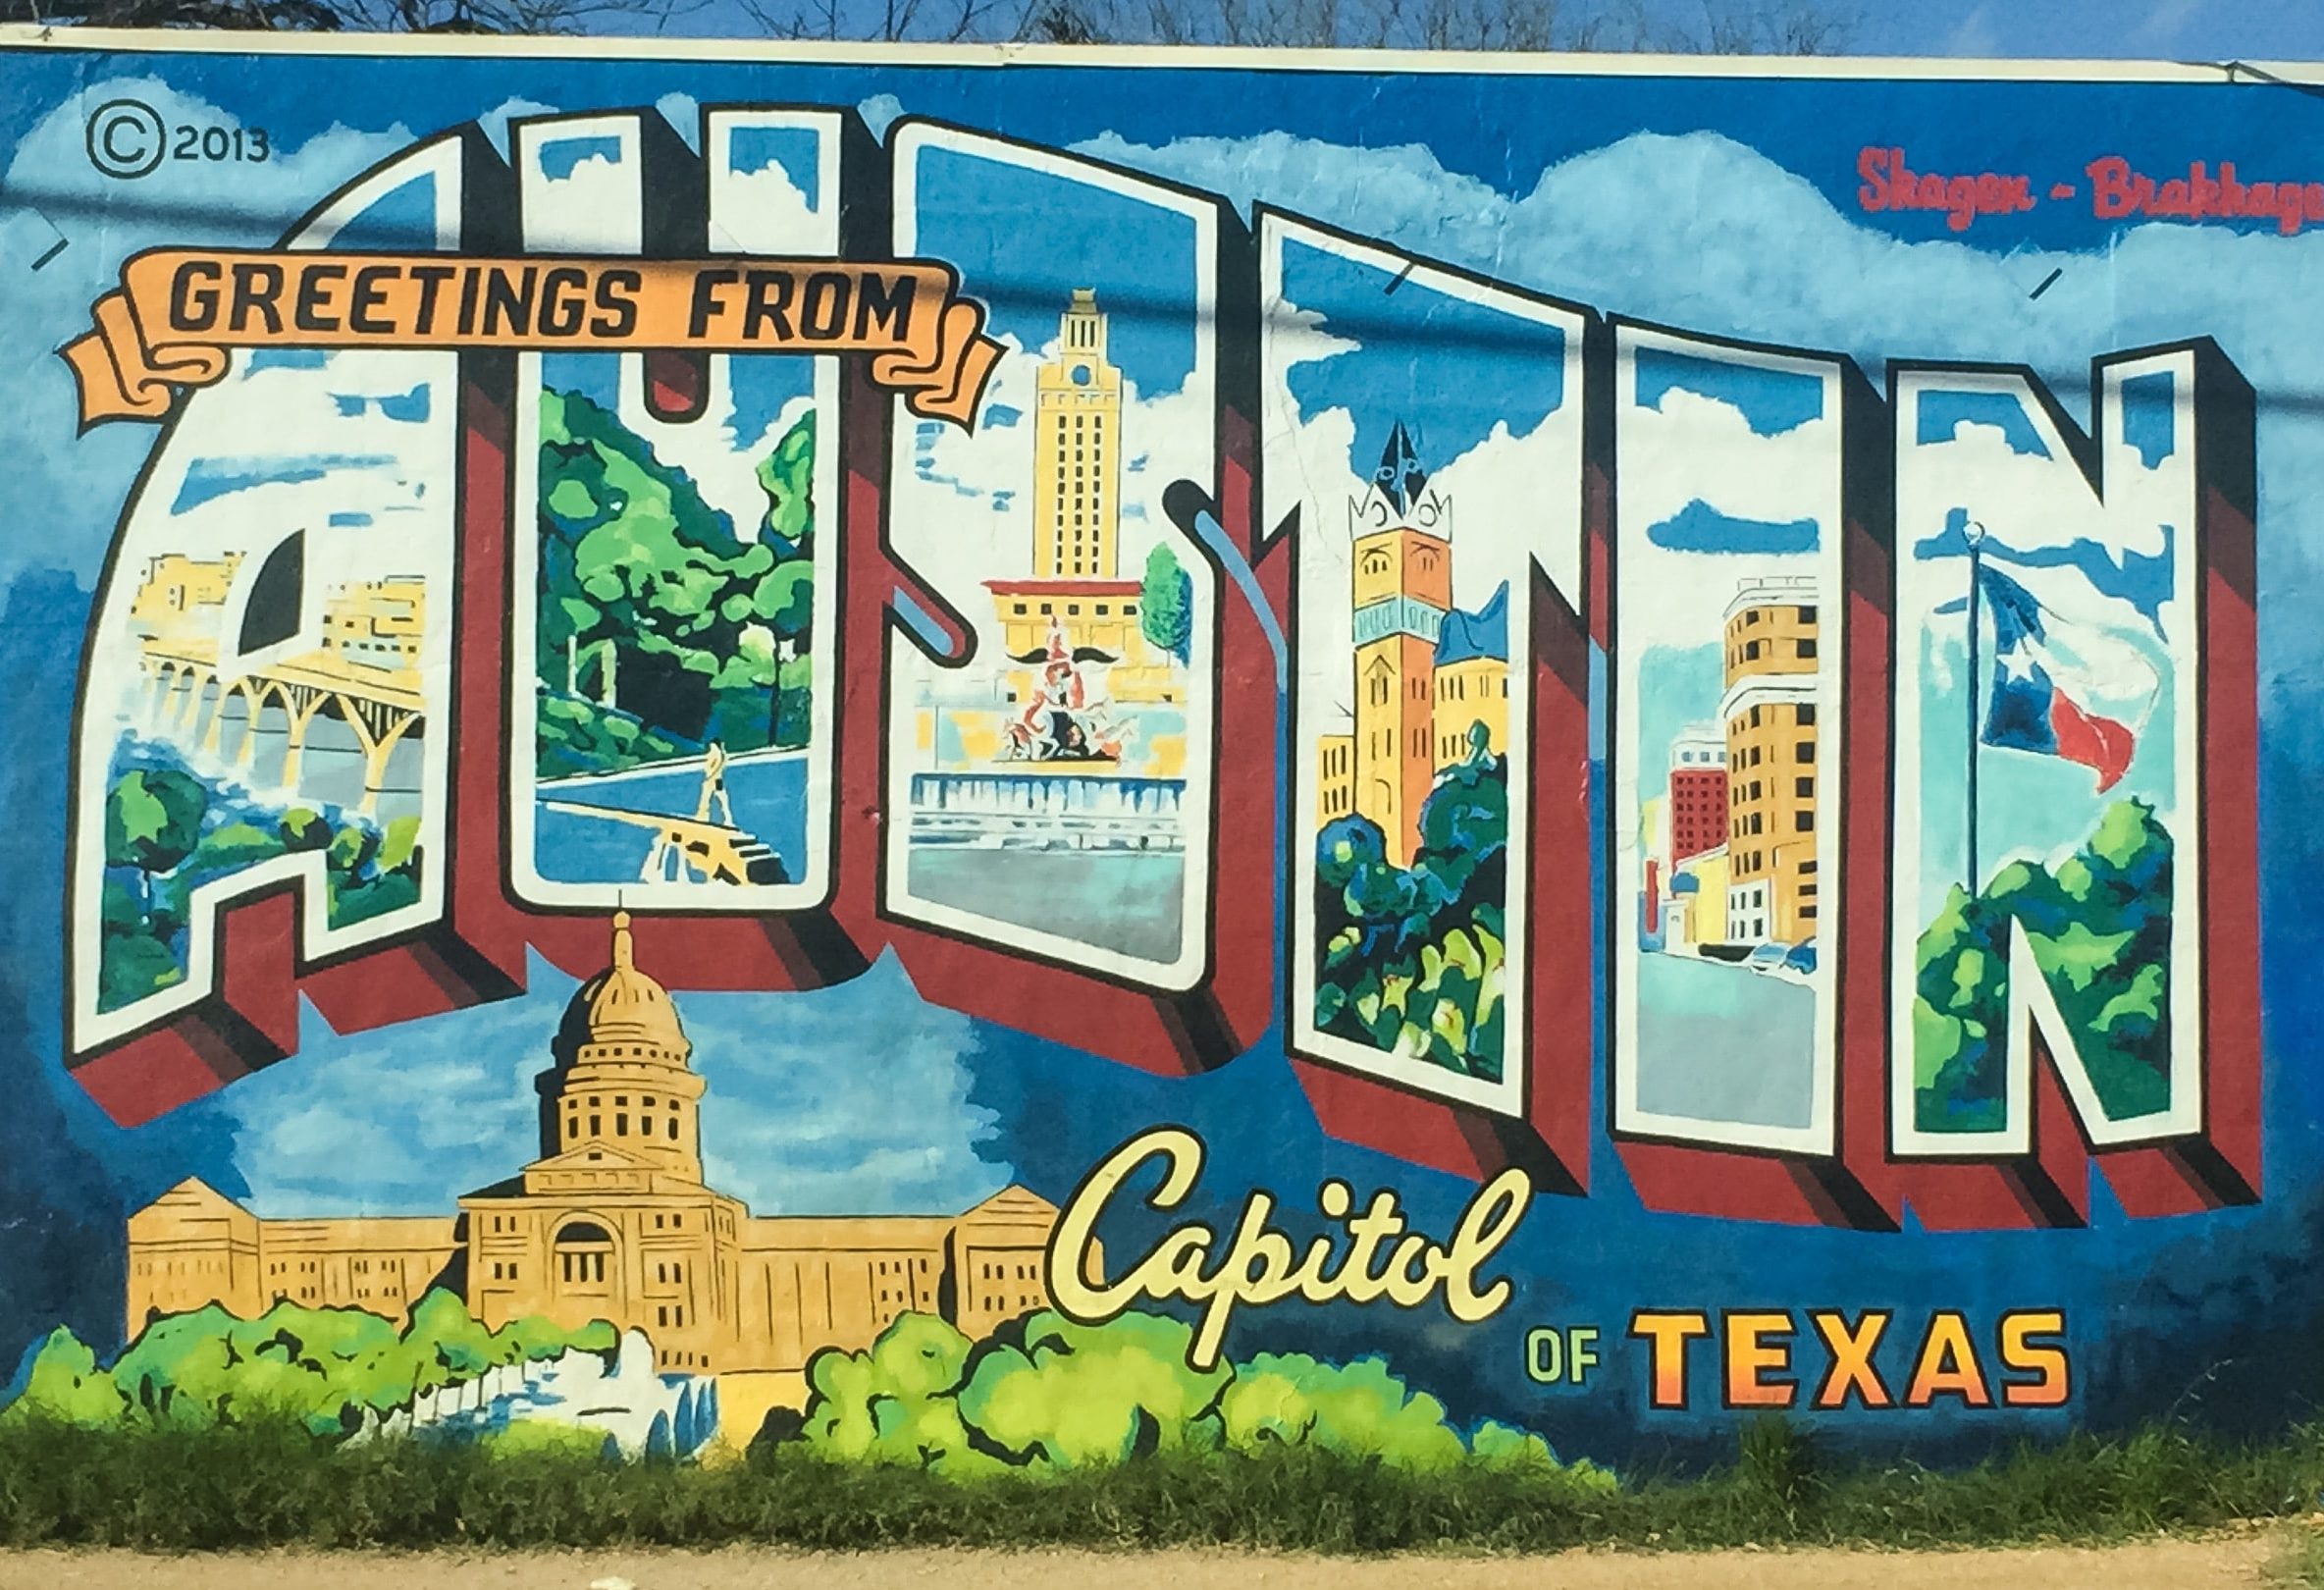 Traveling to Austin, Texas? Or maybe you already live there and are looking for something fun and fresh to do? Experience the “you gotta see’s” as well as the non-traditional route with lesser known, unique finds! If you’re on the lookout for day trip ideas, I found some fun things to do in Austin (even as a local). Whether you’re traveling solo or visiting with a group, there’s something for you!